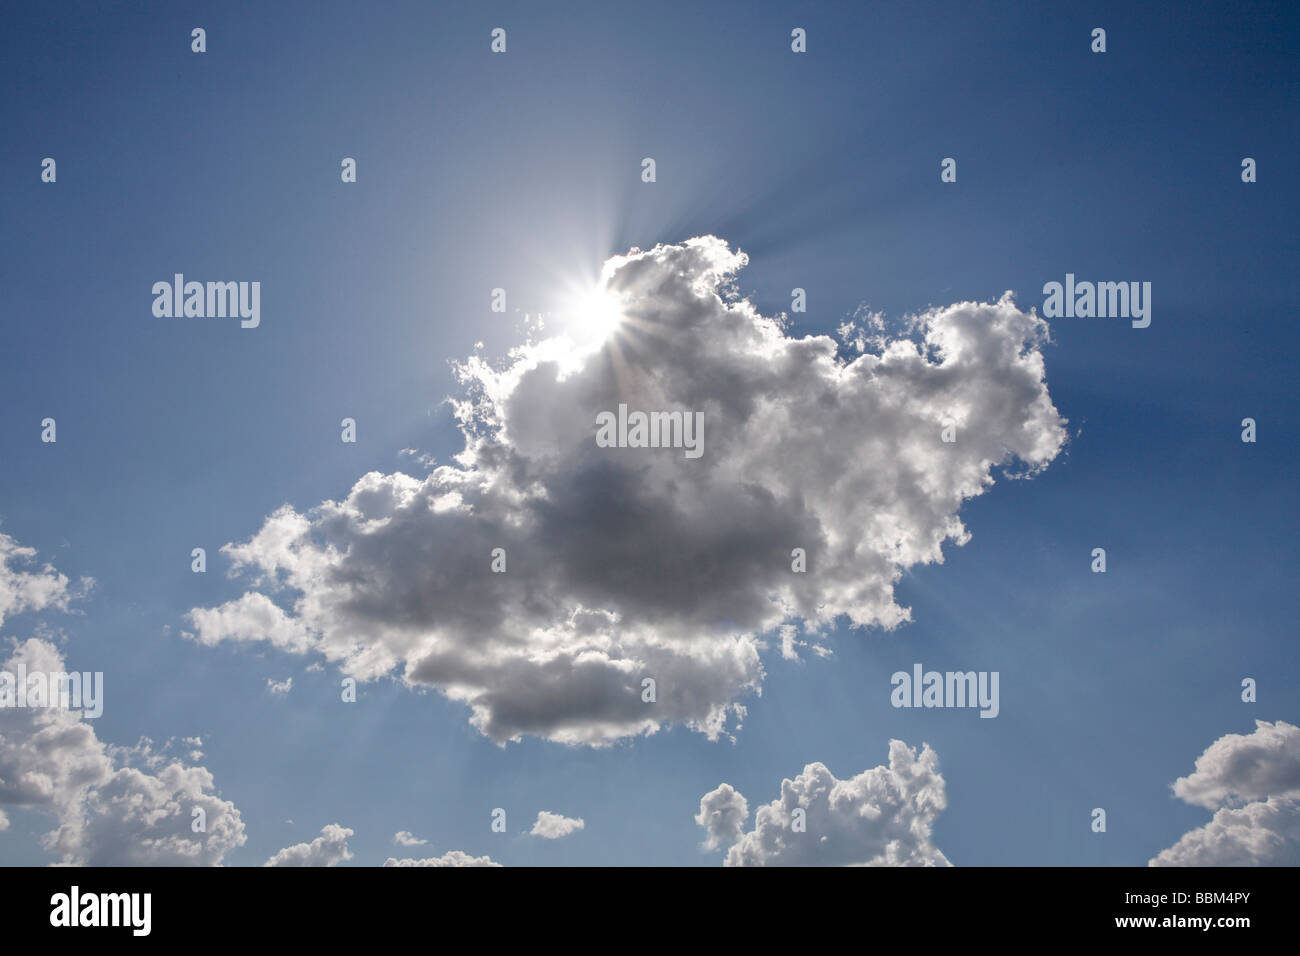 Sun behind a white cloud in front of a blue sky Stock Photo